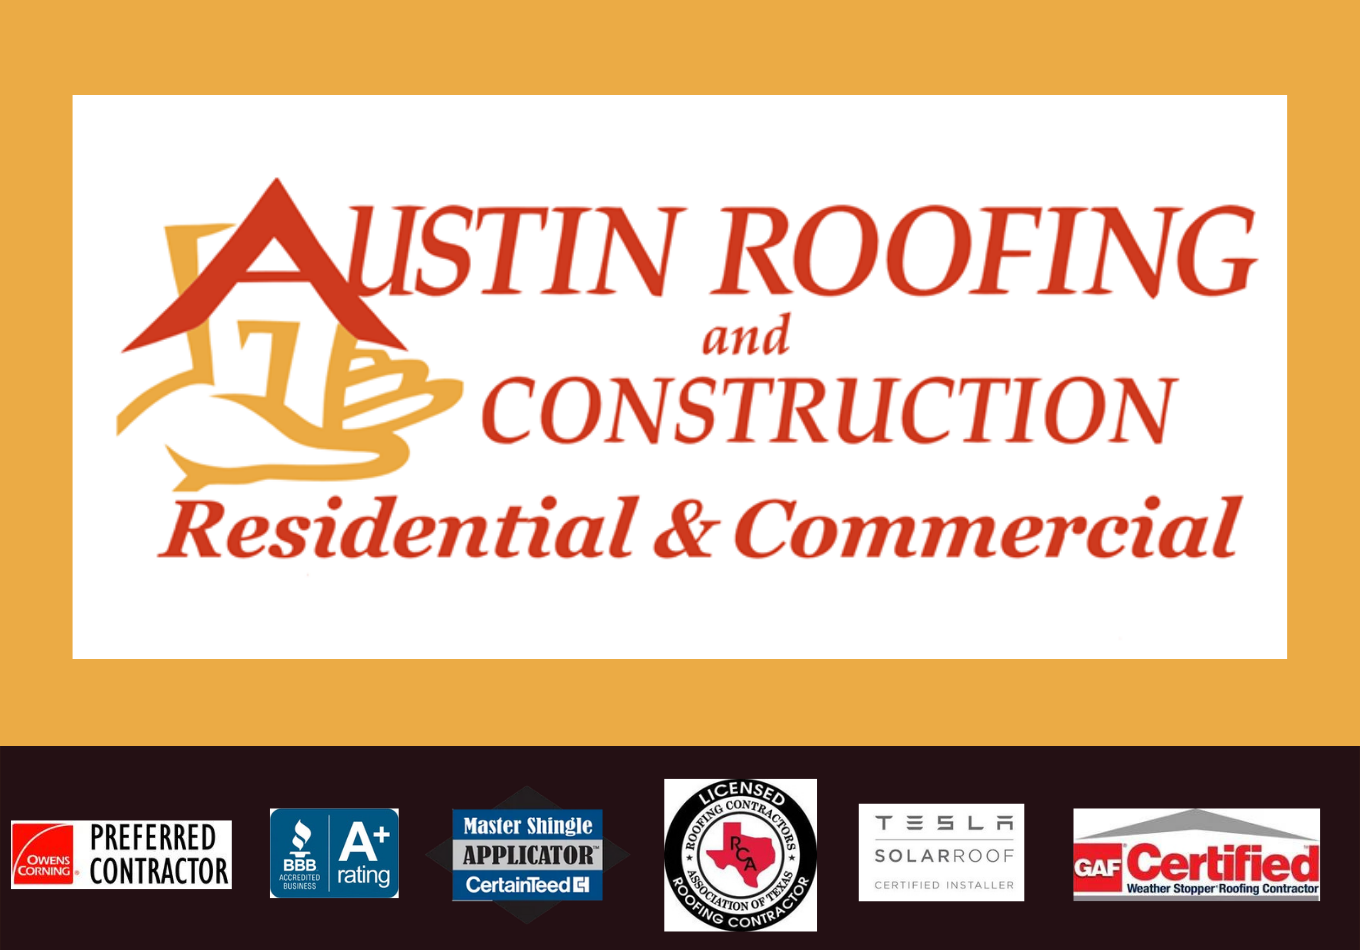 Austin Roofing and Construction, Tuesday, September 28, 2021, Press release picture